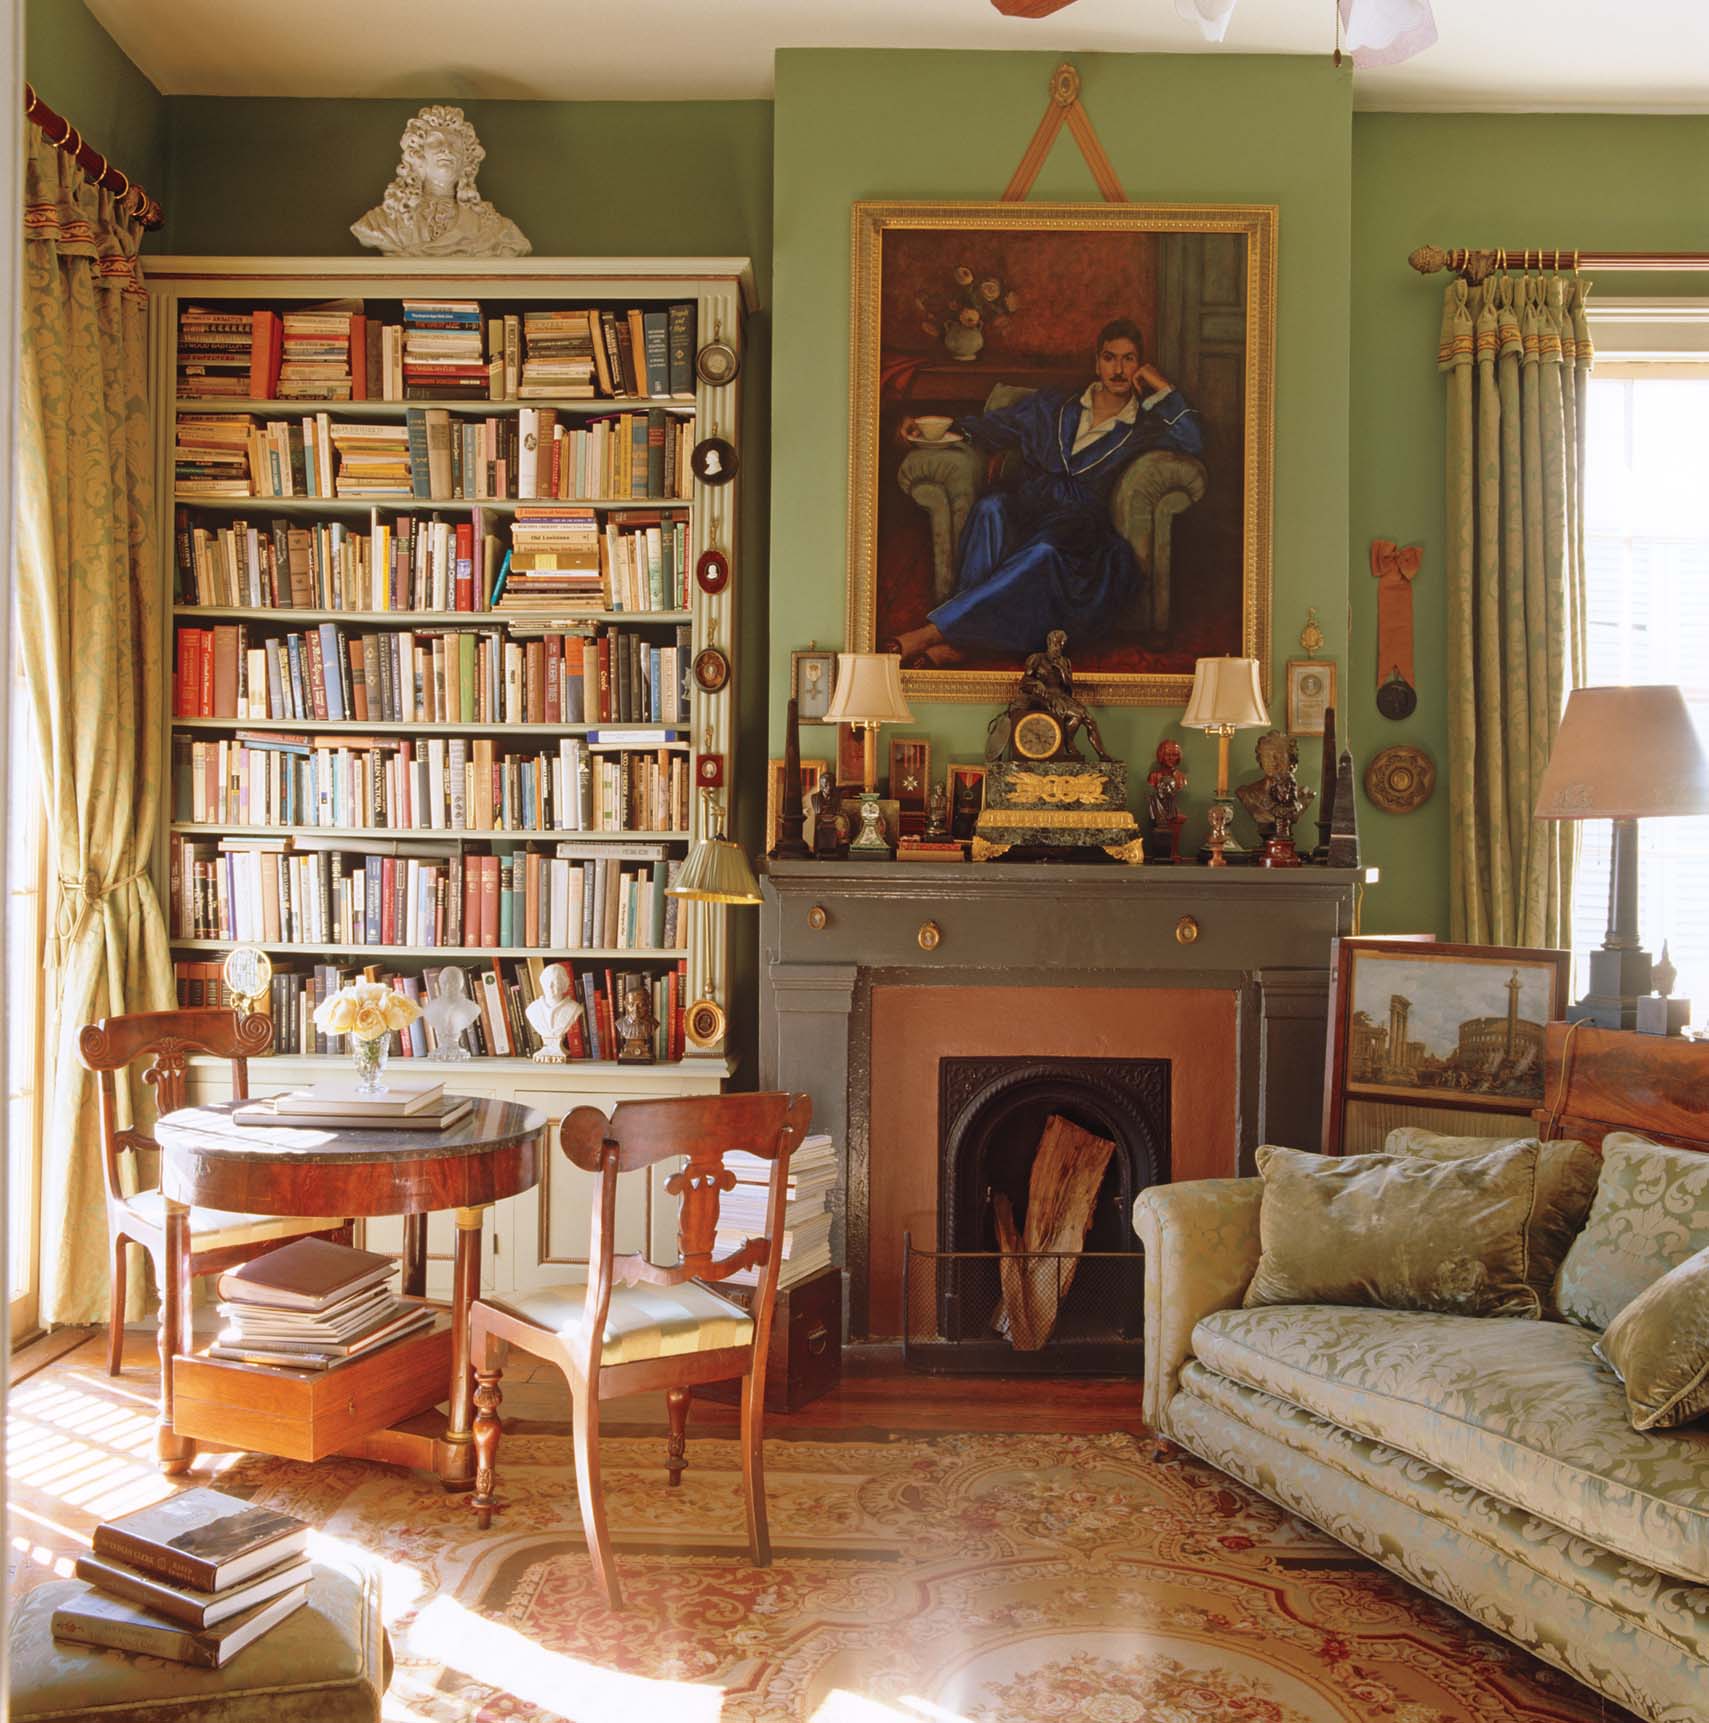 Patrick Dunne's home library is painted a soft green and is filled with sunlight by tall windows. A portrait hanging above the fireplace in the living room sets the tone for the library corner where a Biedermeier table and chairs provide a sunlit place to read